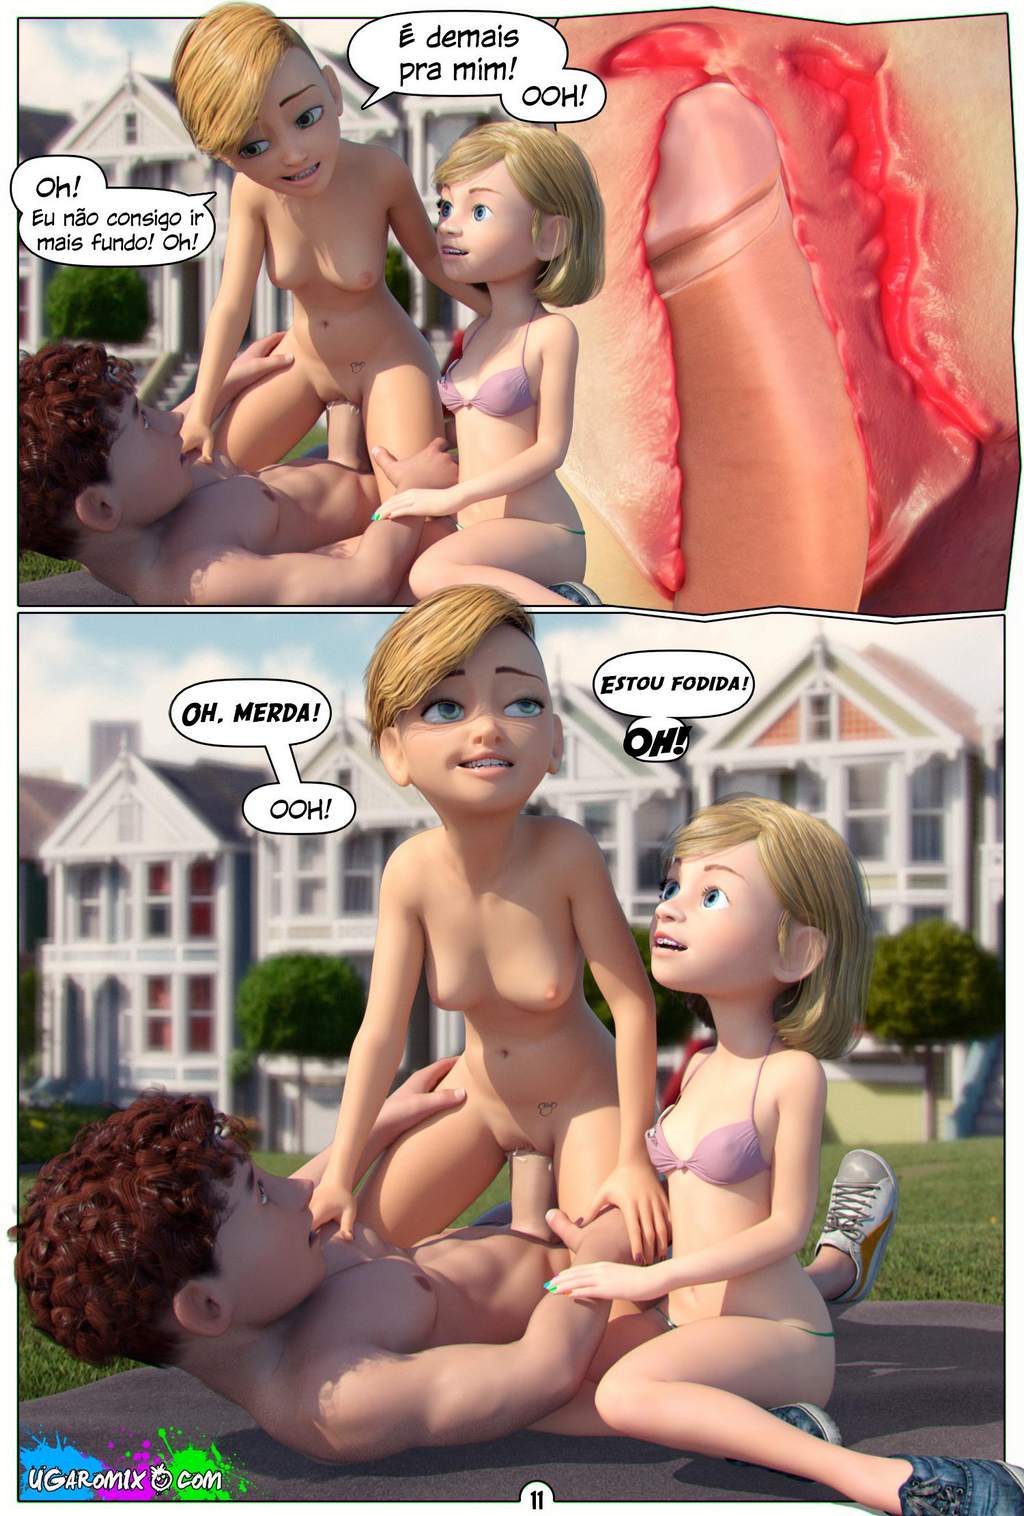 Inside-Riley-6-In-The-Park-With-Rapunzel-Ugaromix-Novinha-The-Hentai-12